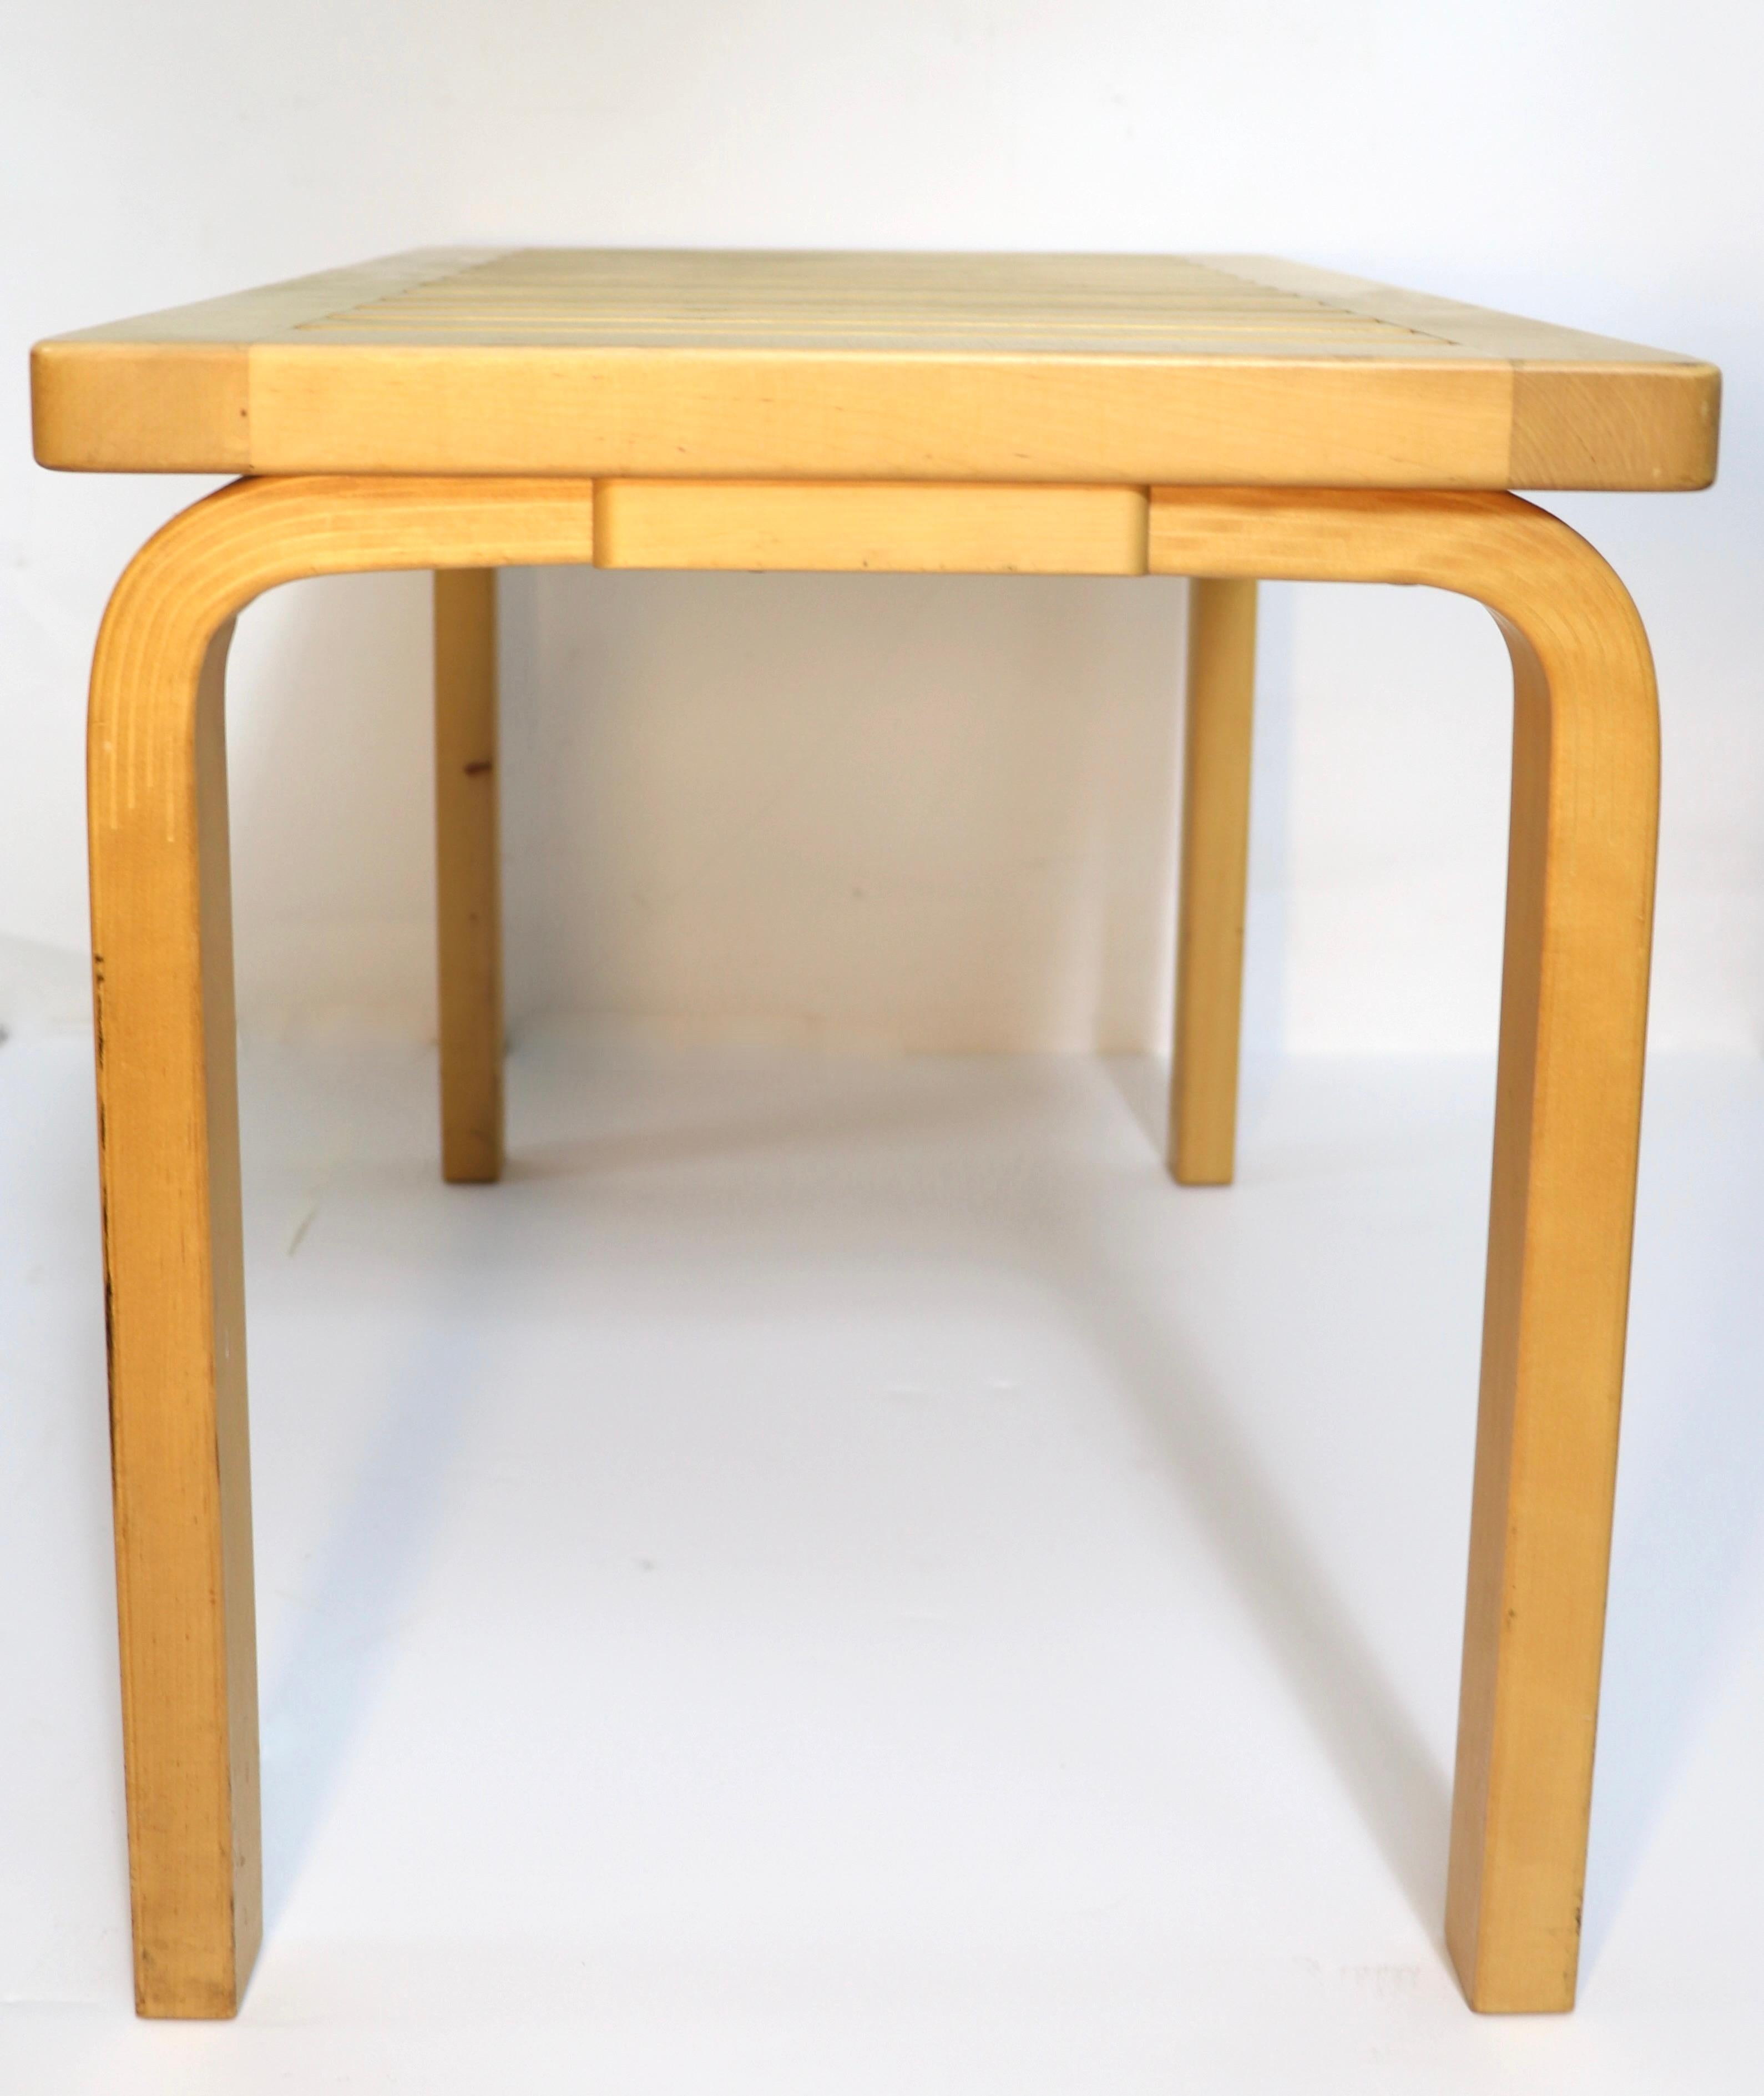 Birch Iconic Aalto Table Bench Model 106